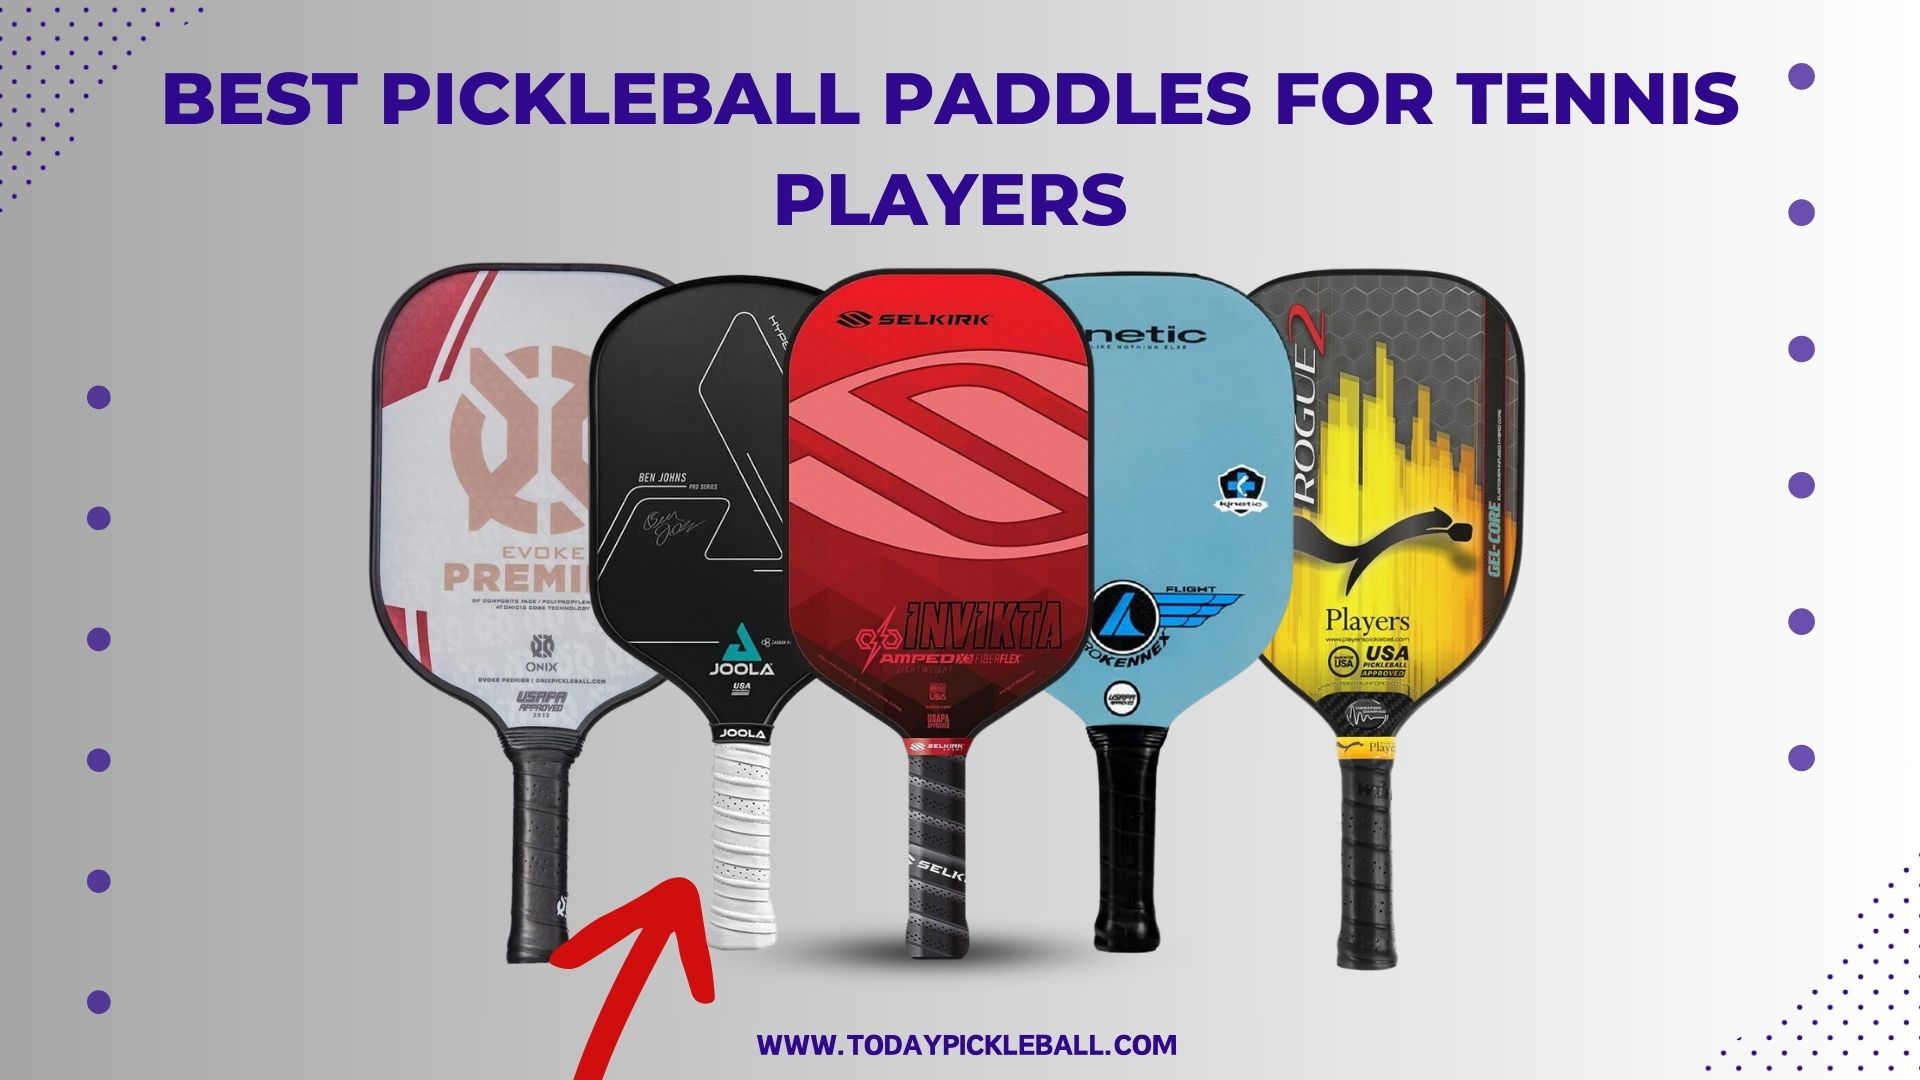 here is the image of the some best pickleball paddles for tennis players who are willing to get the same long handle and high spin feelings in pickleball play.